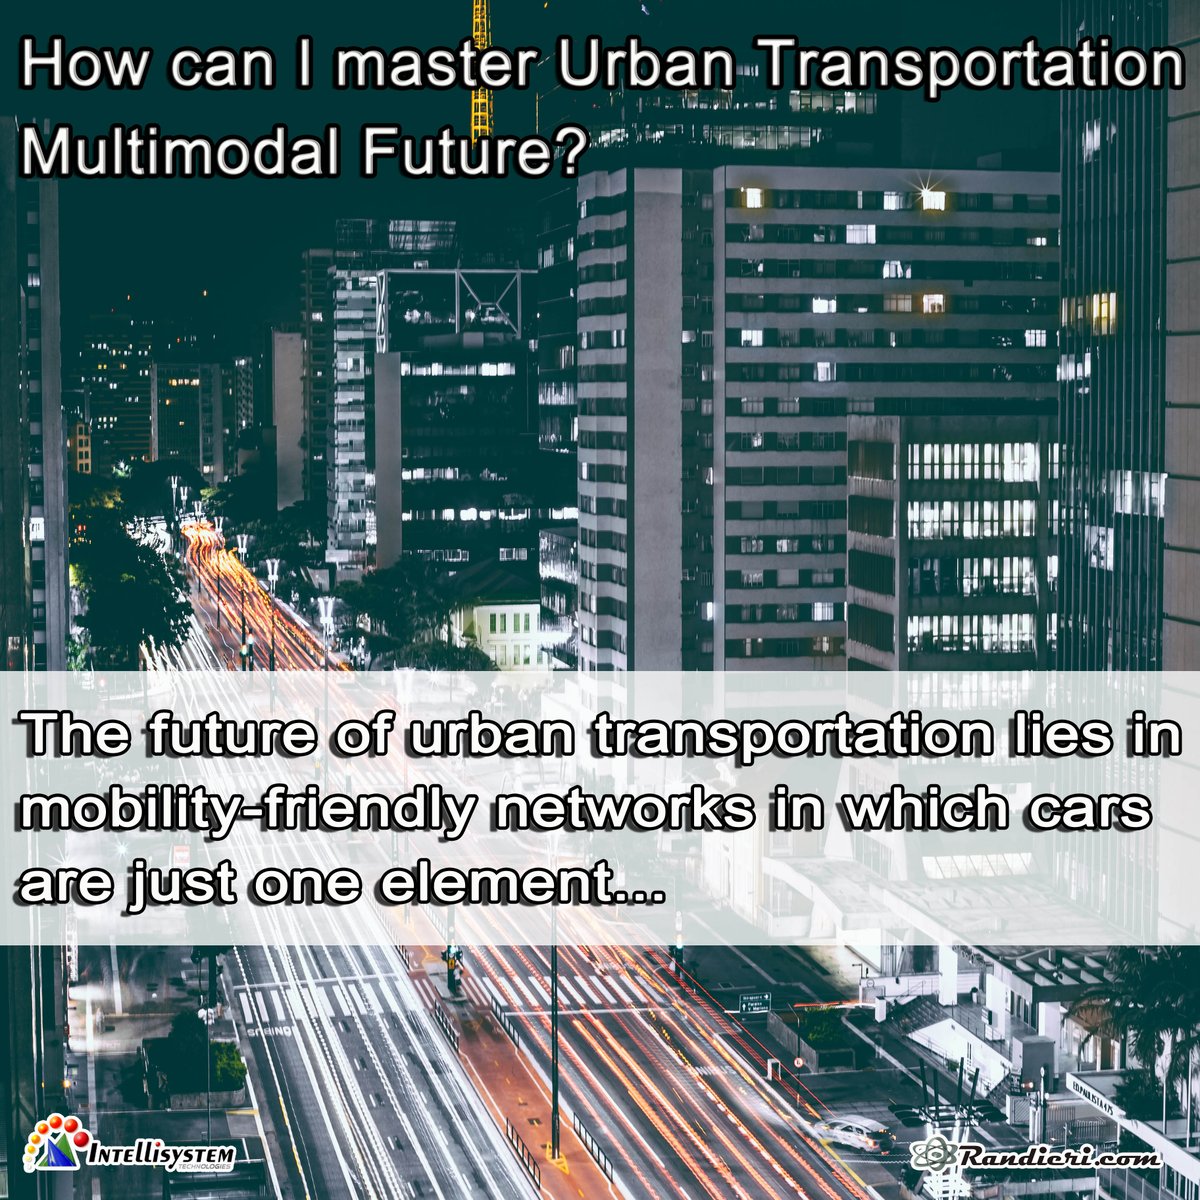 How can I master Urban Transportation Multimodal Future?

The future of urban transportation lies in mobility-friendly...

randieri.com/en/english-how…

#Urban #Transportation #Multimodal #Future #lies #mobilityfriendly #networks #shrinking #vehicle #ridesharing #padroneggiare